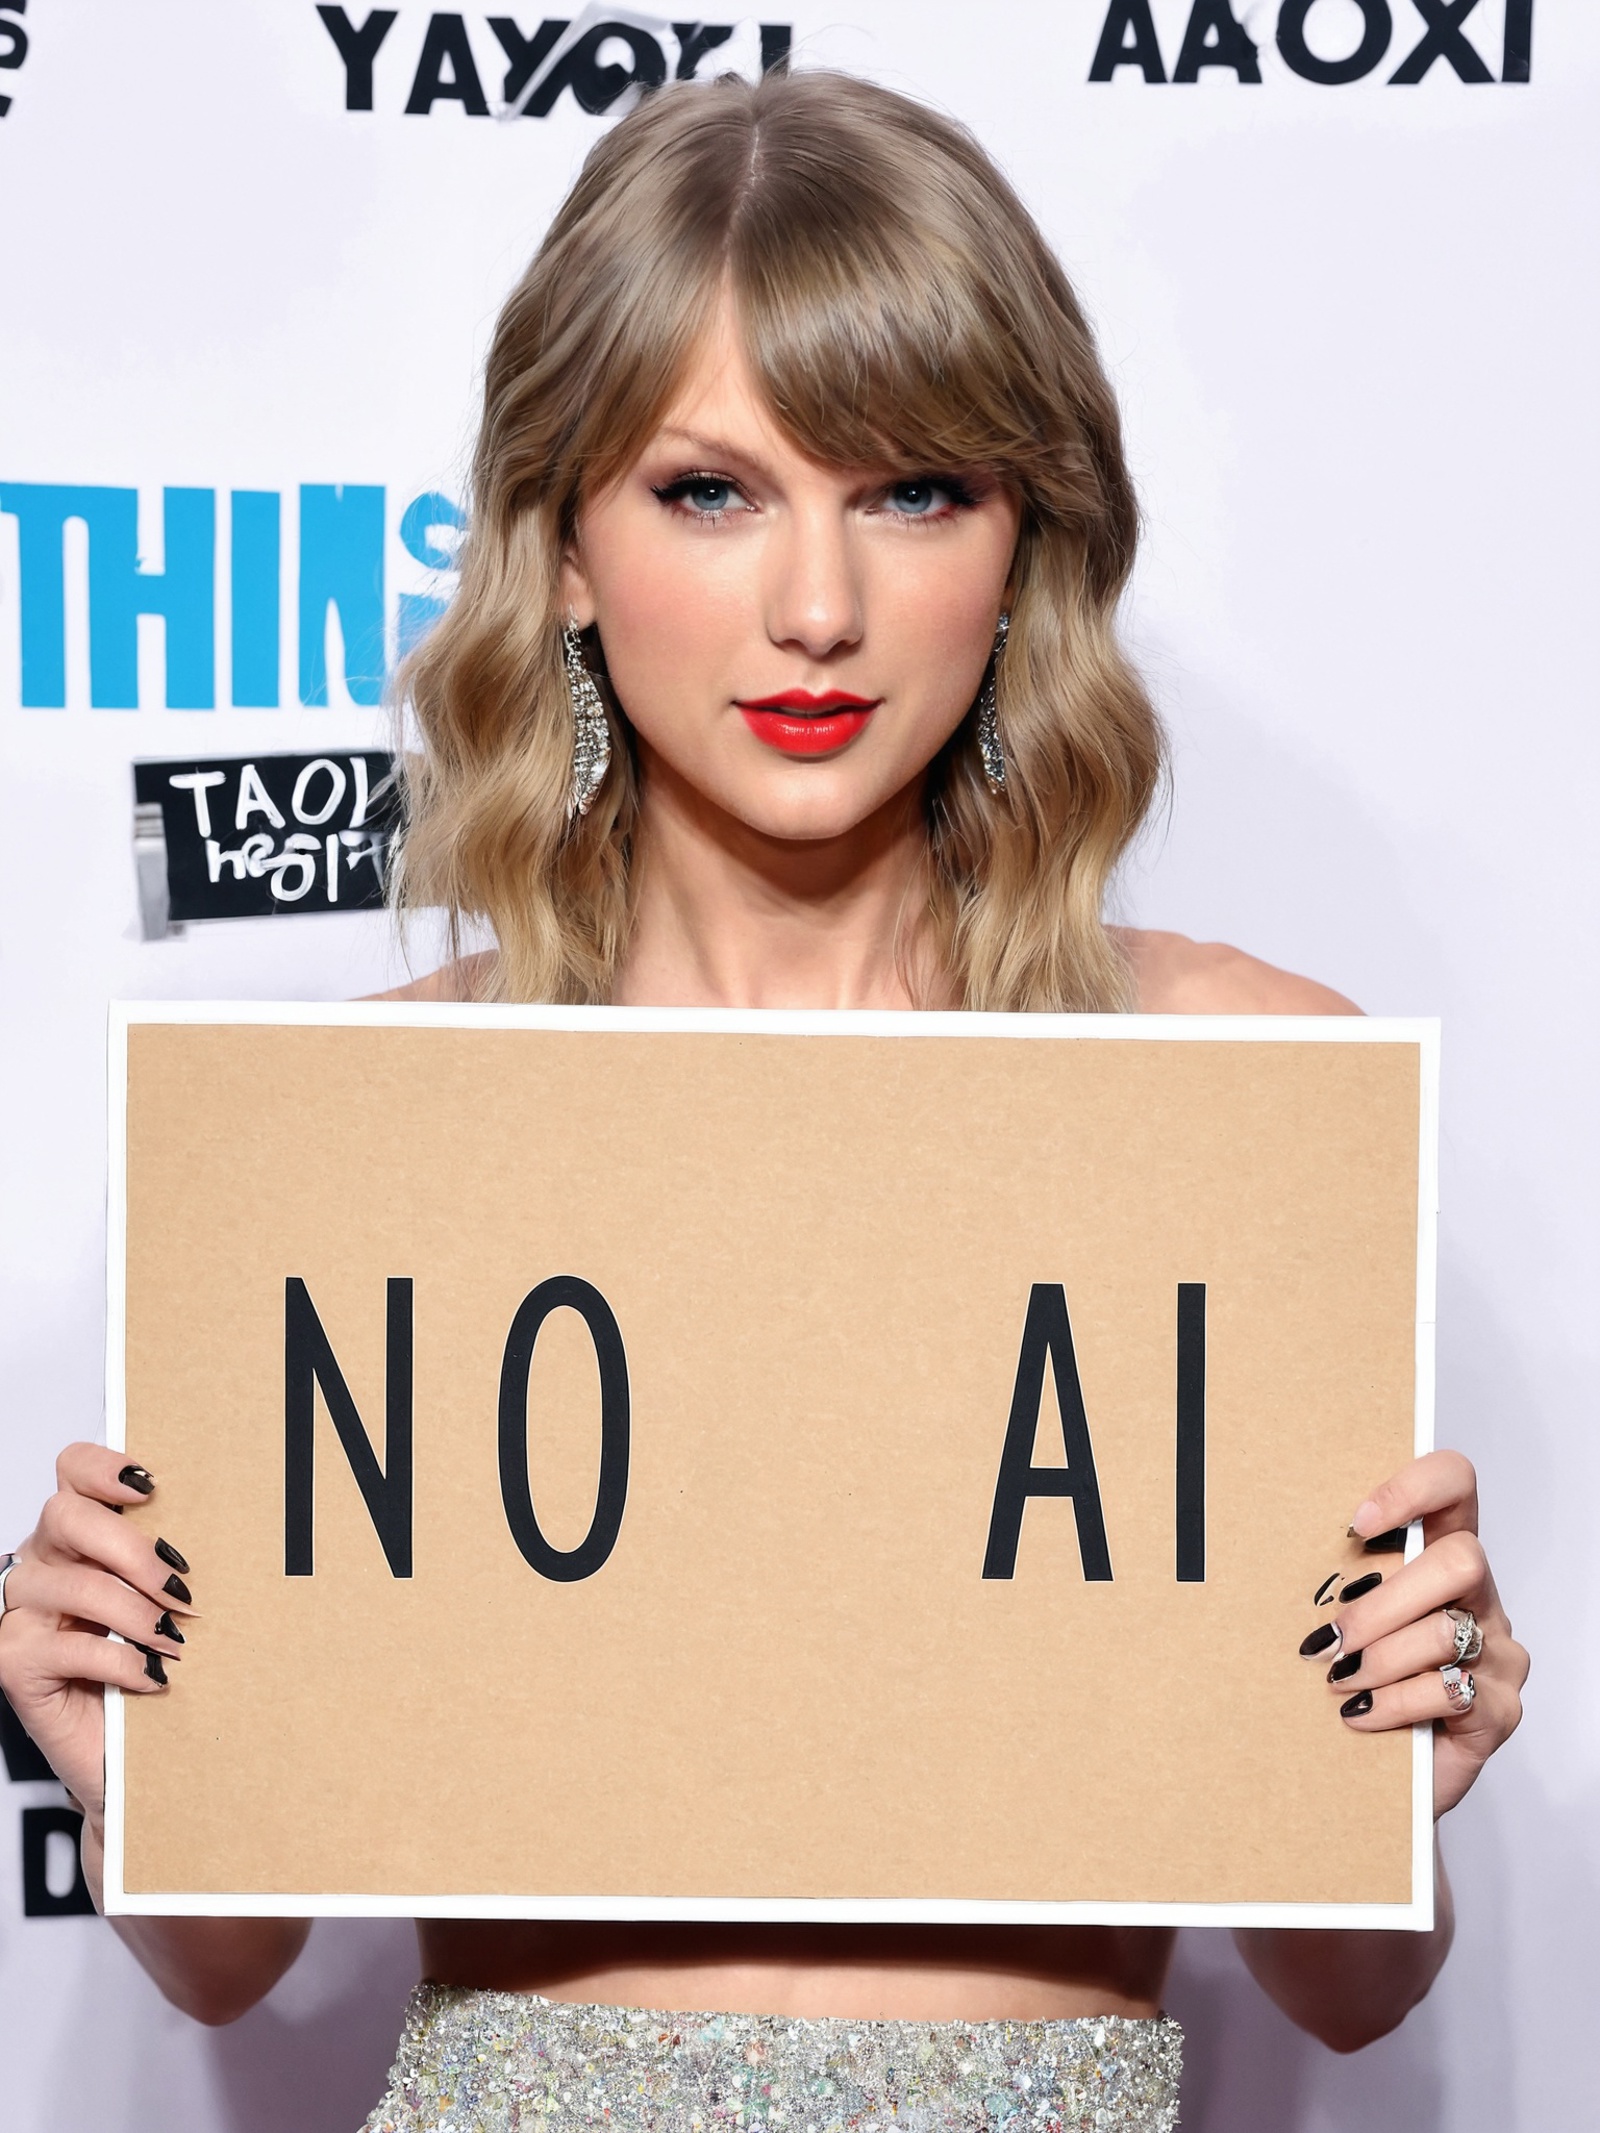 Taylor Swift image by Dead_Internet_Theory